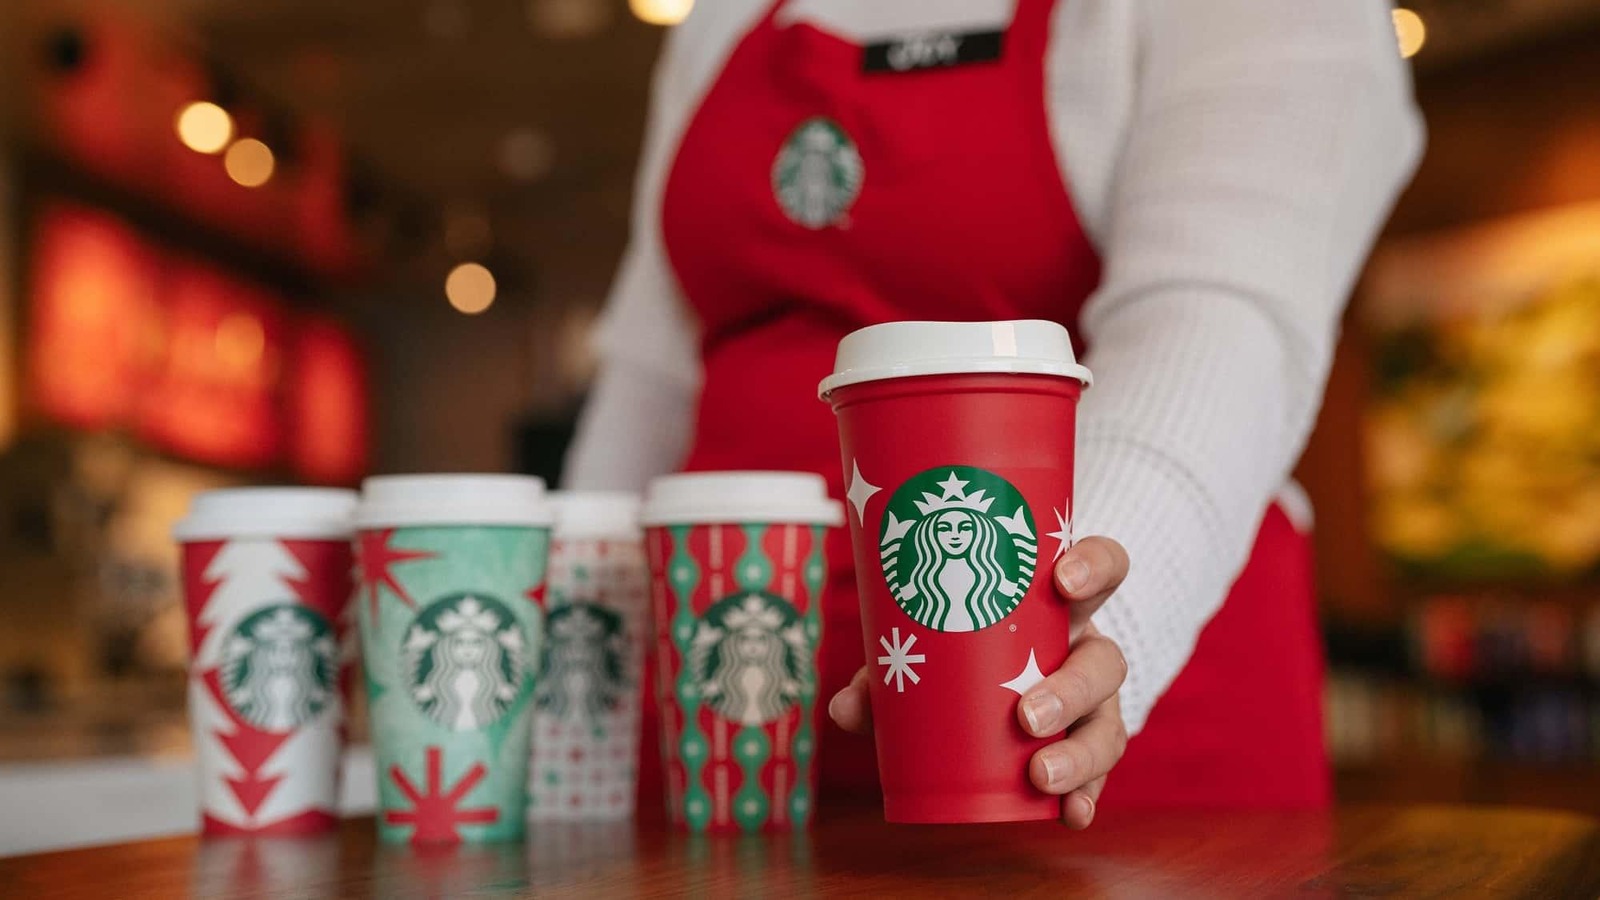 Starbucks Red Cup Day 2022 Get A Free Reusable Cup With Holiday And